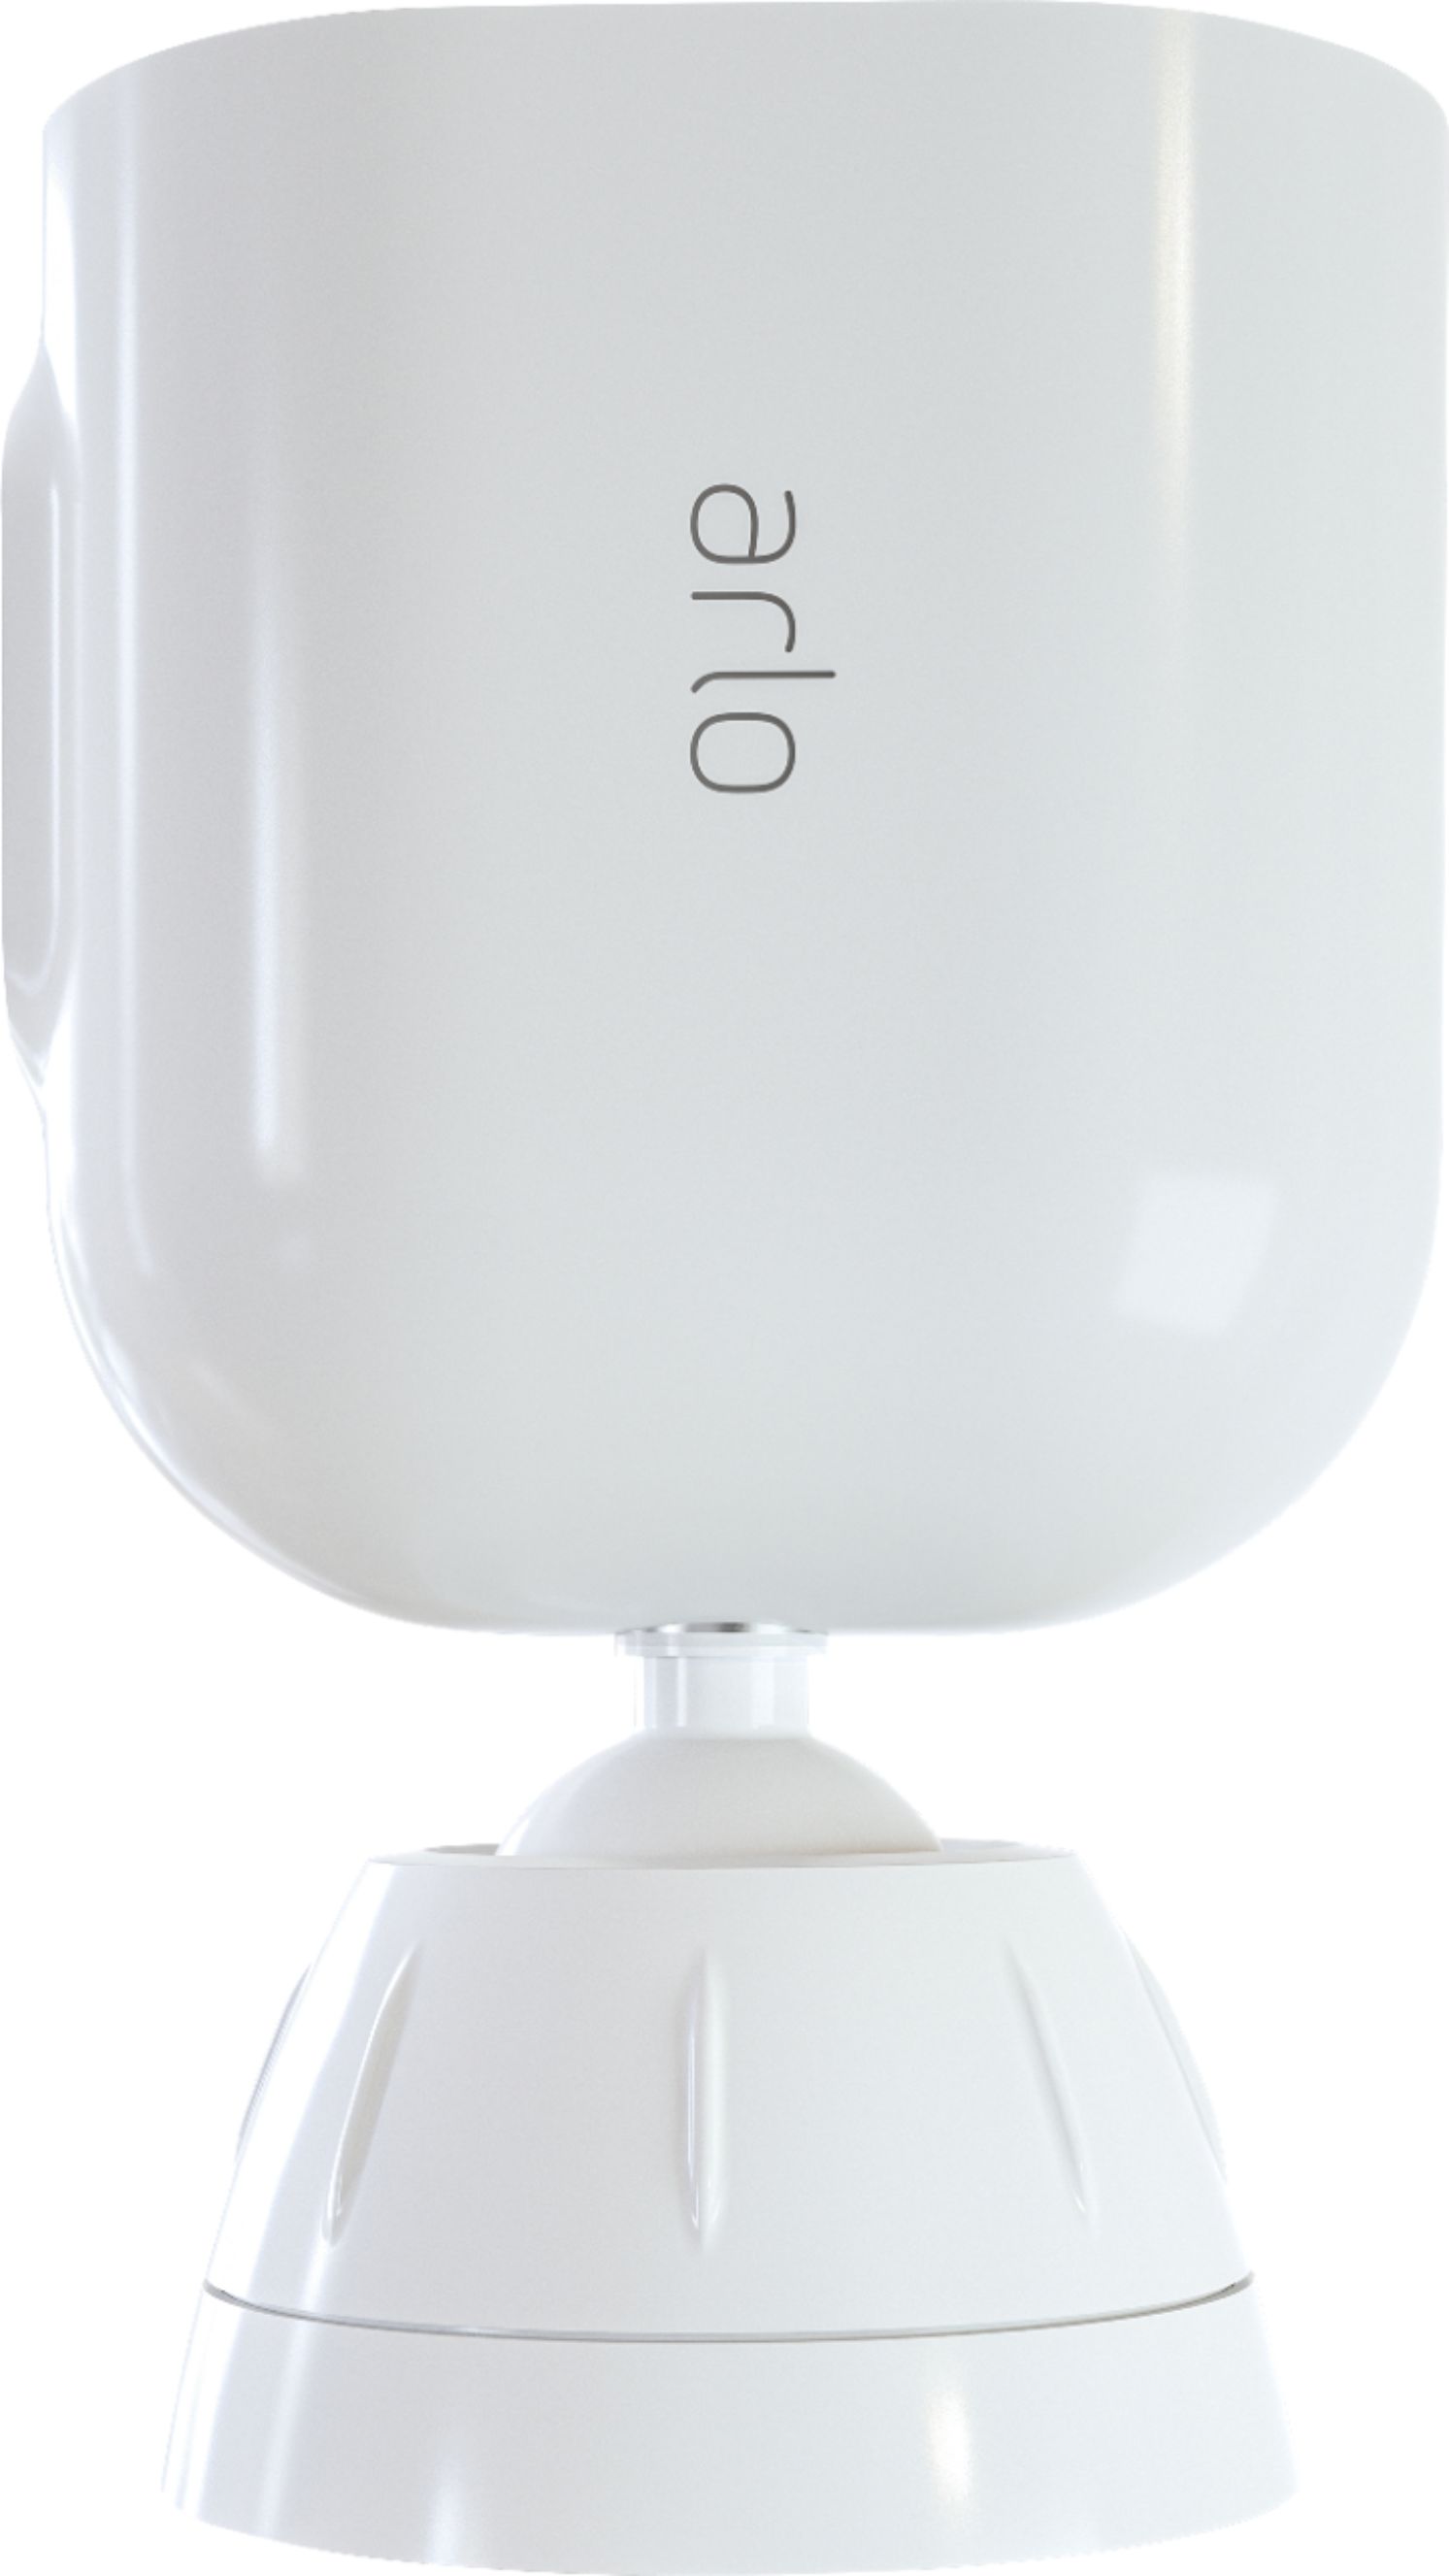 Angle View: Arlo - Total Security Mount for Pro 5S 2K, Pro 4, Pro 3, Ultra 2, and Ultra Cameras - White